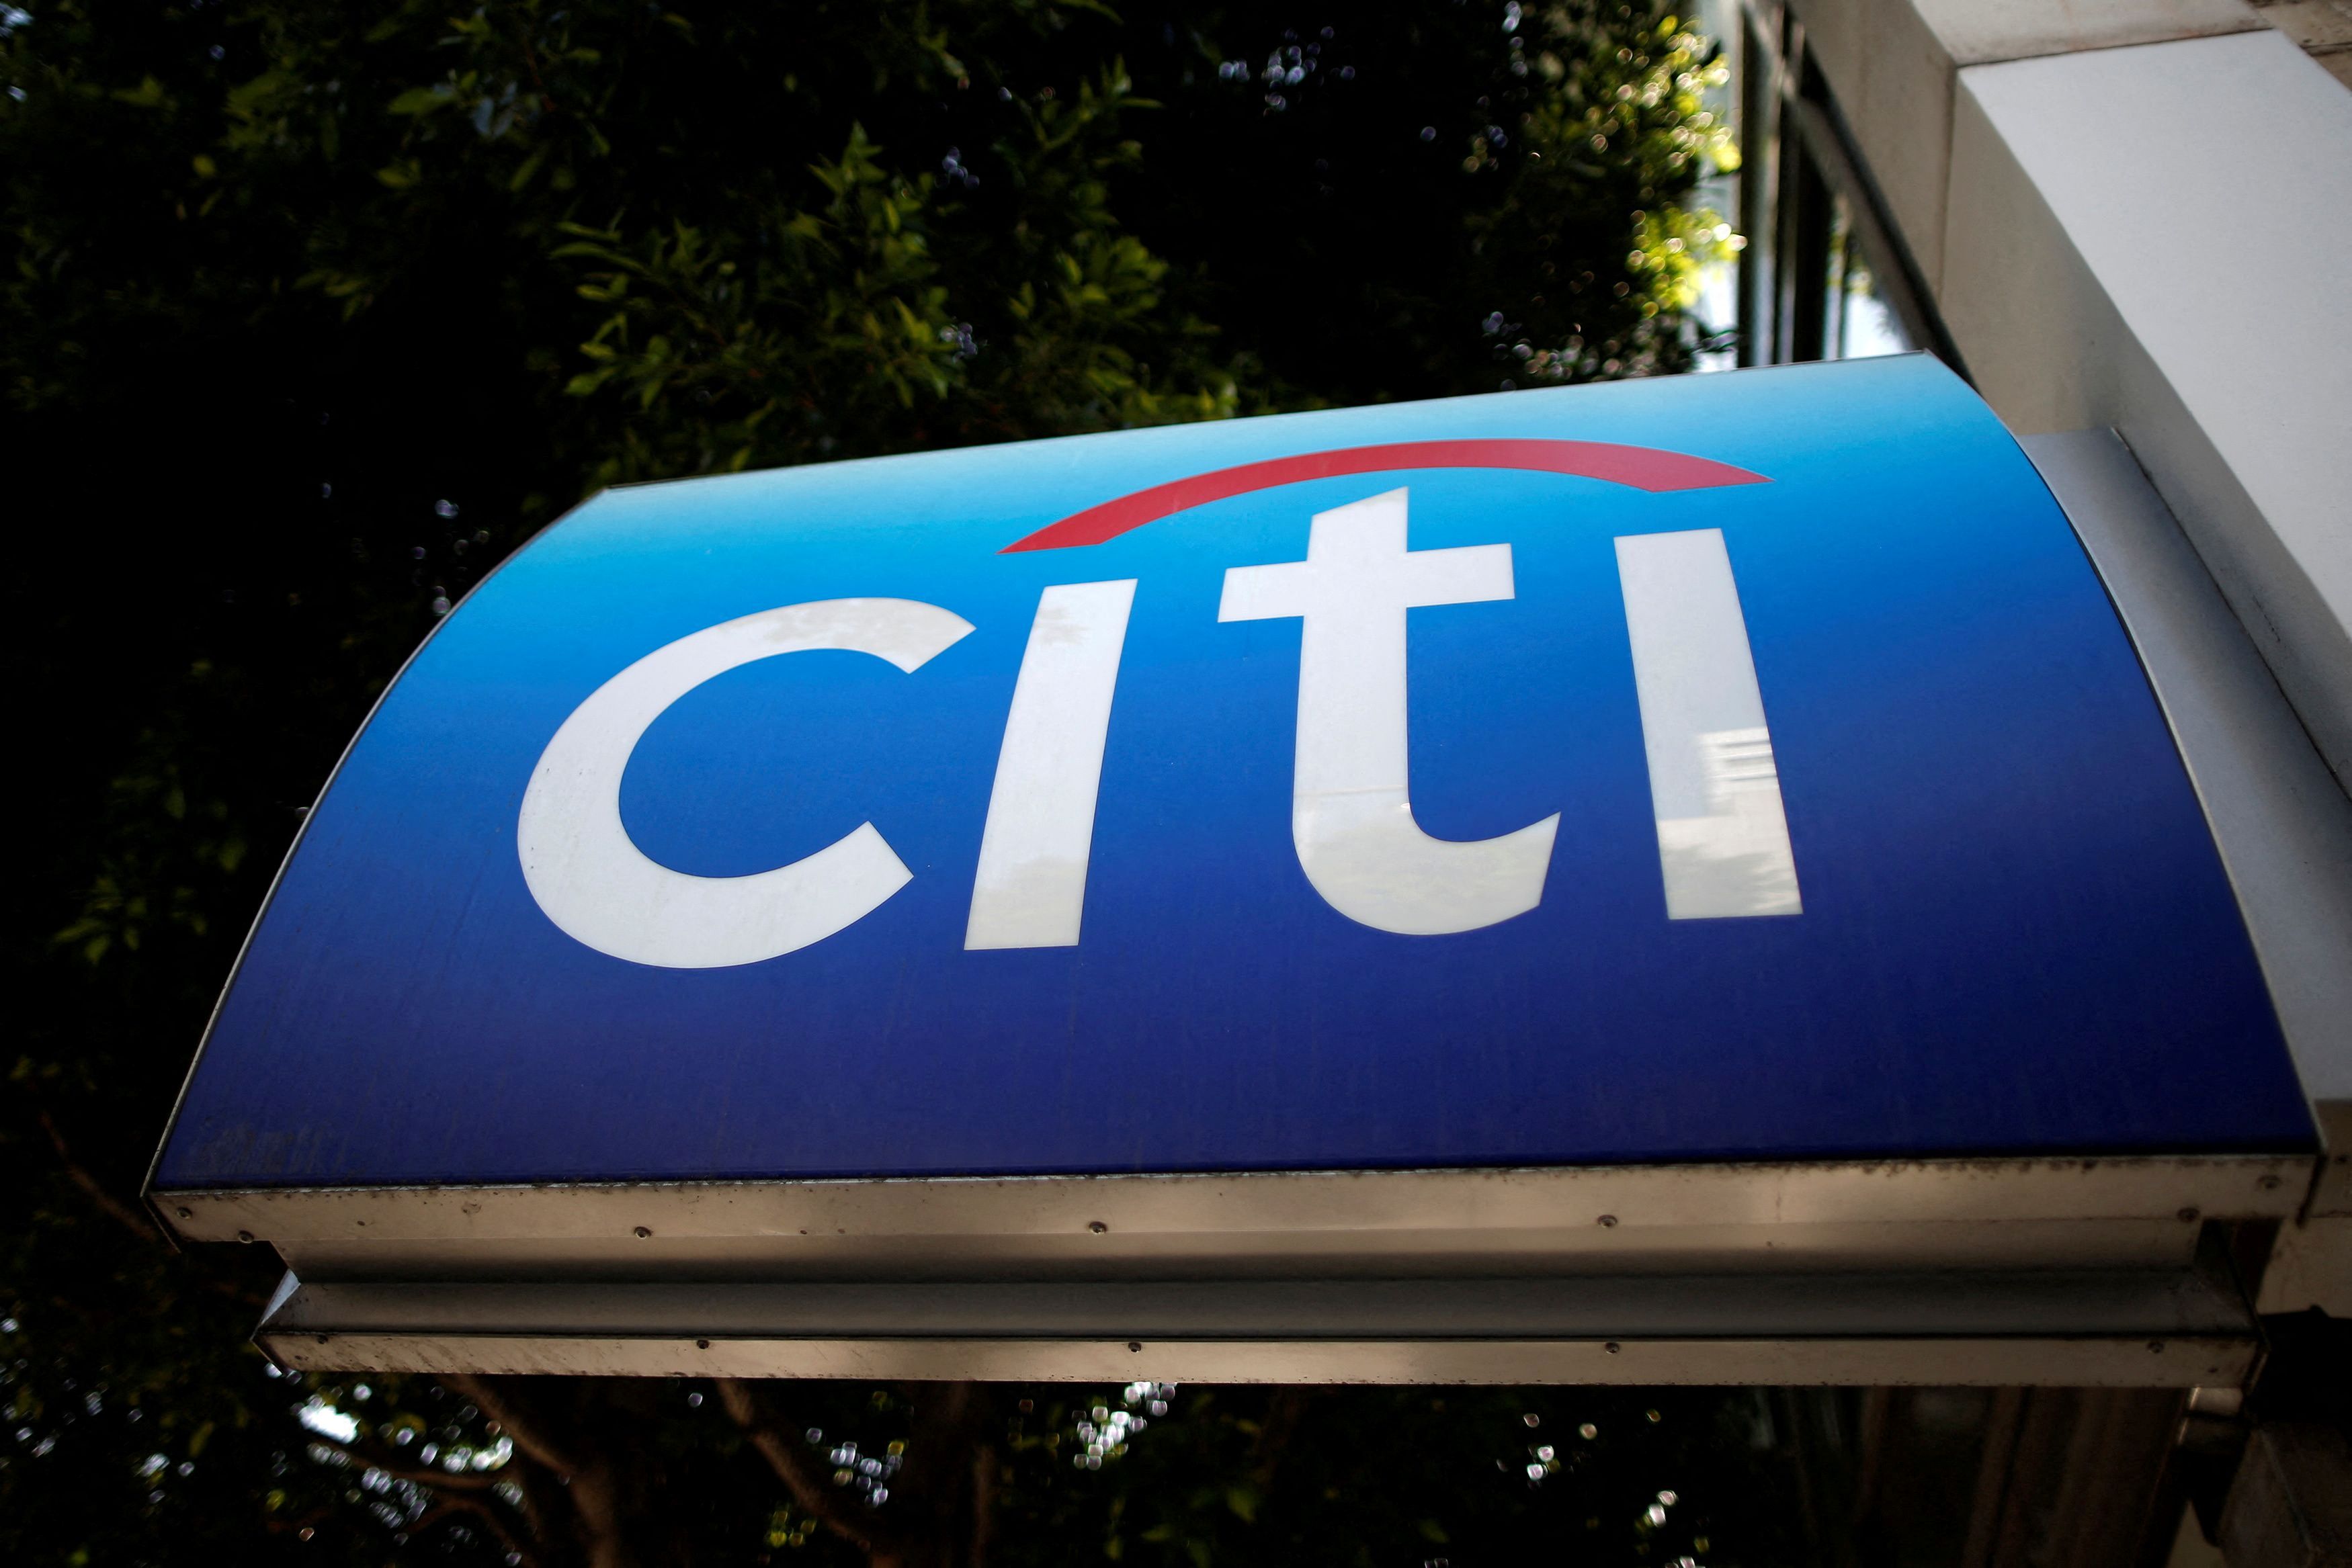 A Citibank ATM is seen in Los Angeles